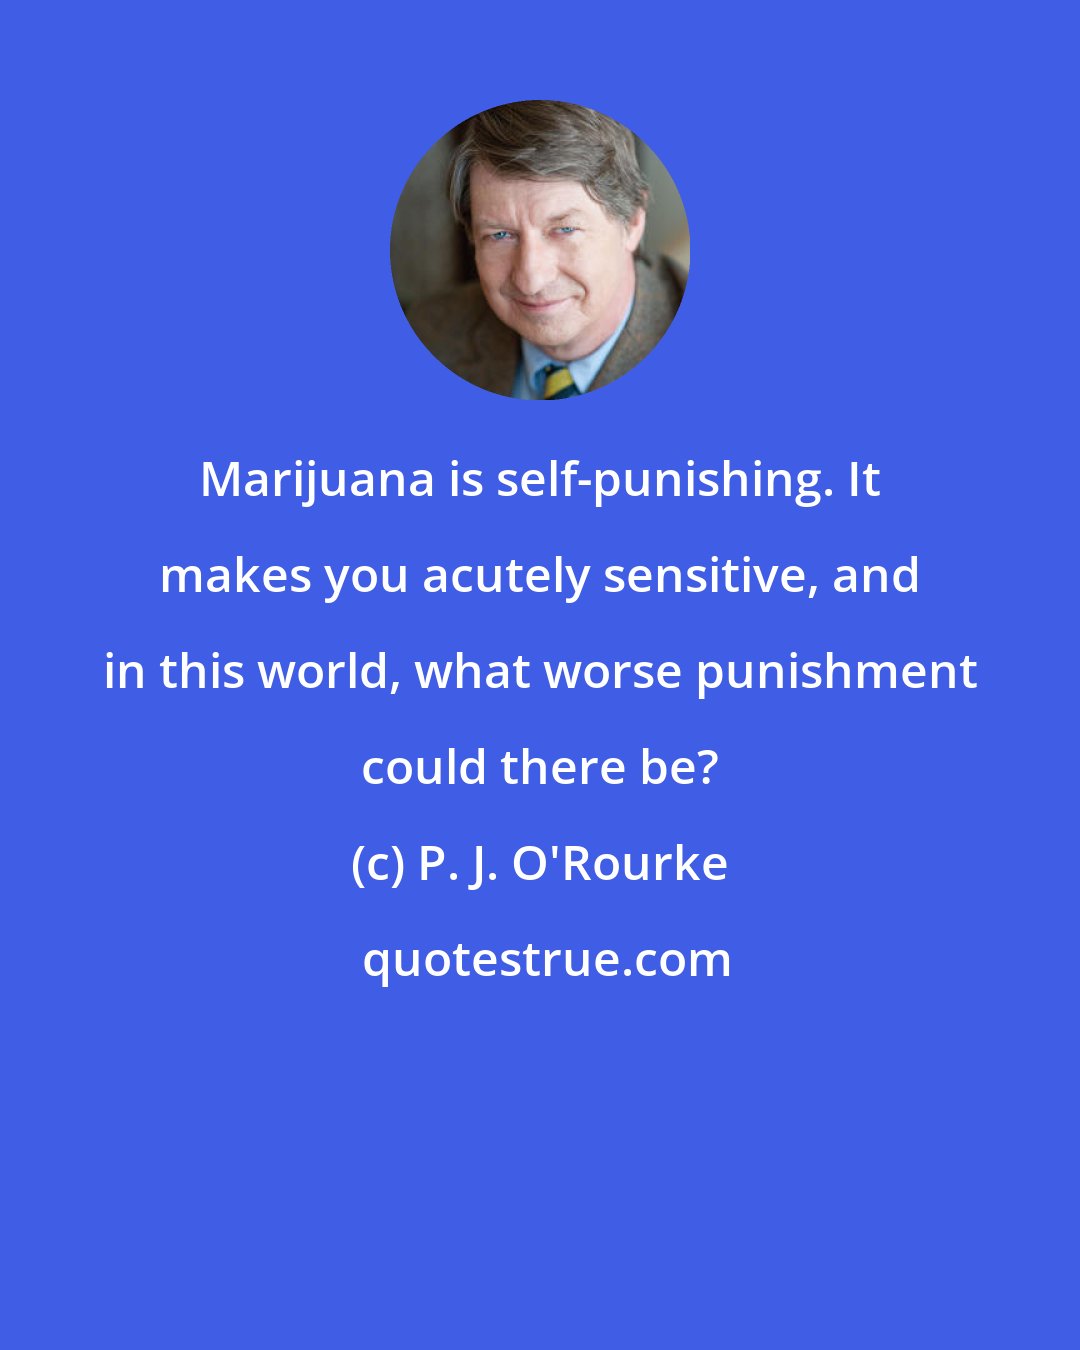 P. J. O'Rourke: Marijuana is self-punishing. It makes you acutely sensitive, and in this world, what worse punishment could there be?